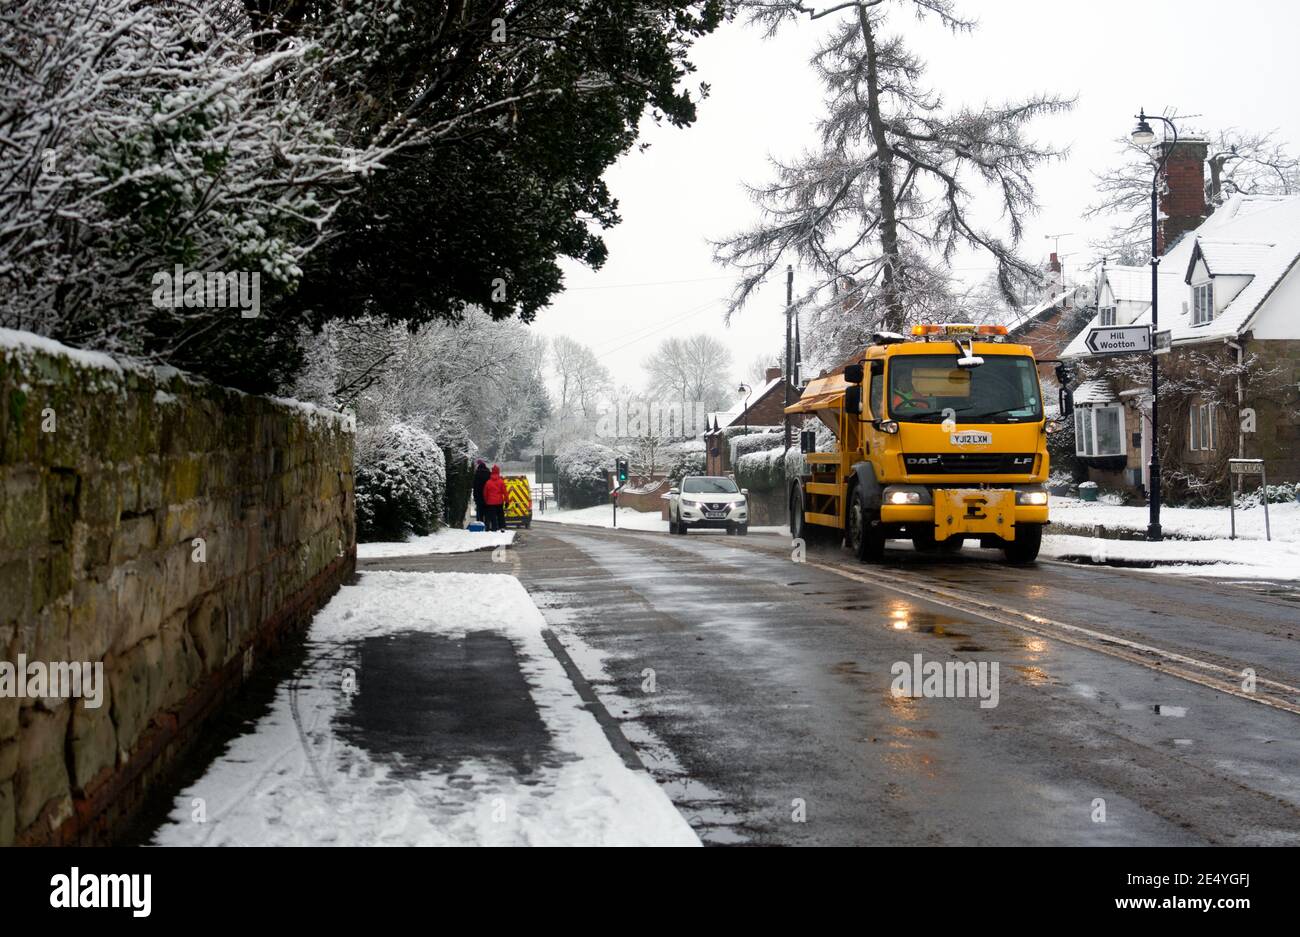 A road gritting lorry in snowy weather, Leek Wootton, Warwickshire, England, UK Stock Photo